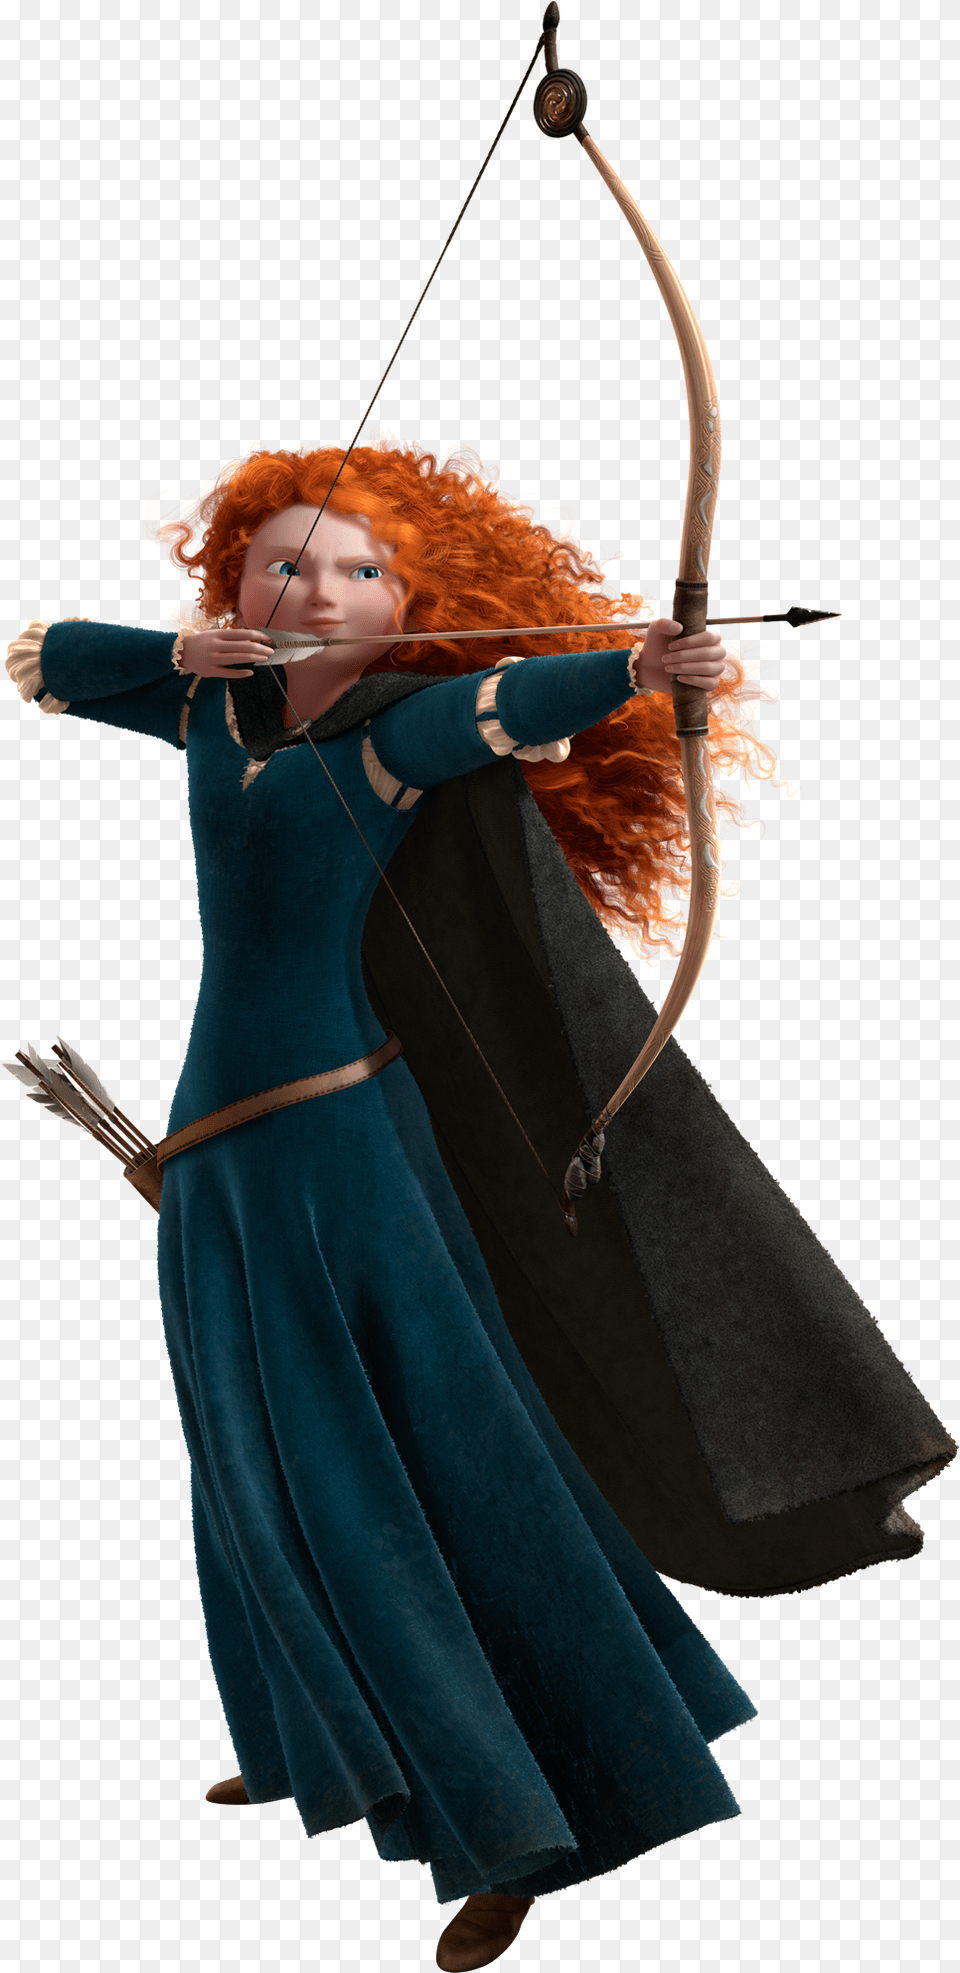 Meridas Bow Merida Bow And Arrow, Adult, Weapon, Sport, Person Free Png Download